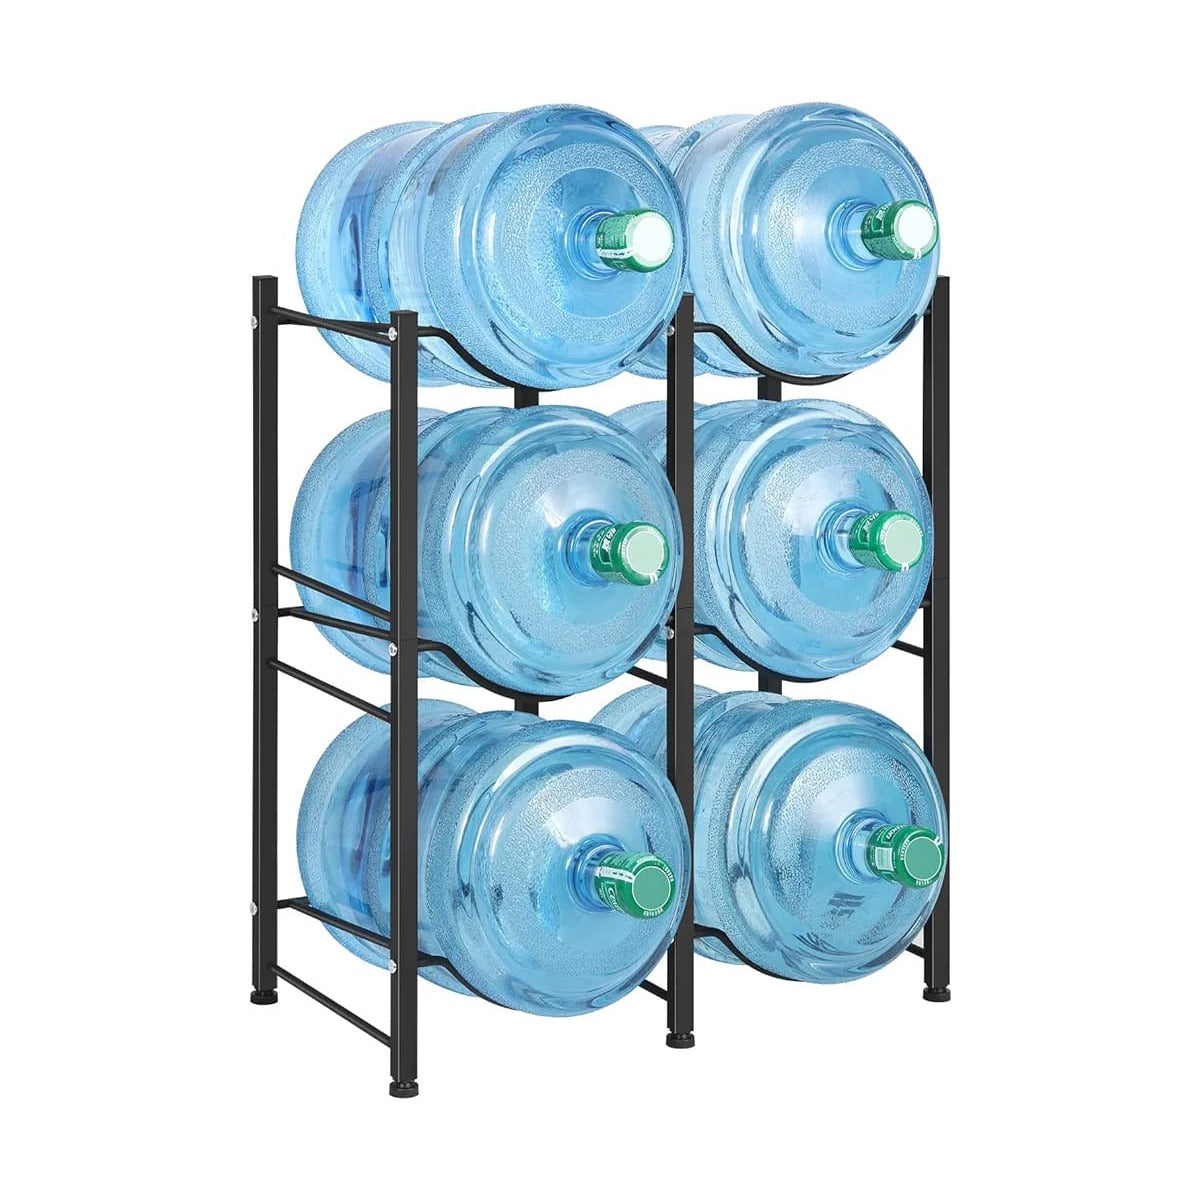 5 Gallon Water Bottle Stand with some bottles